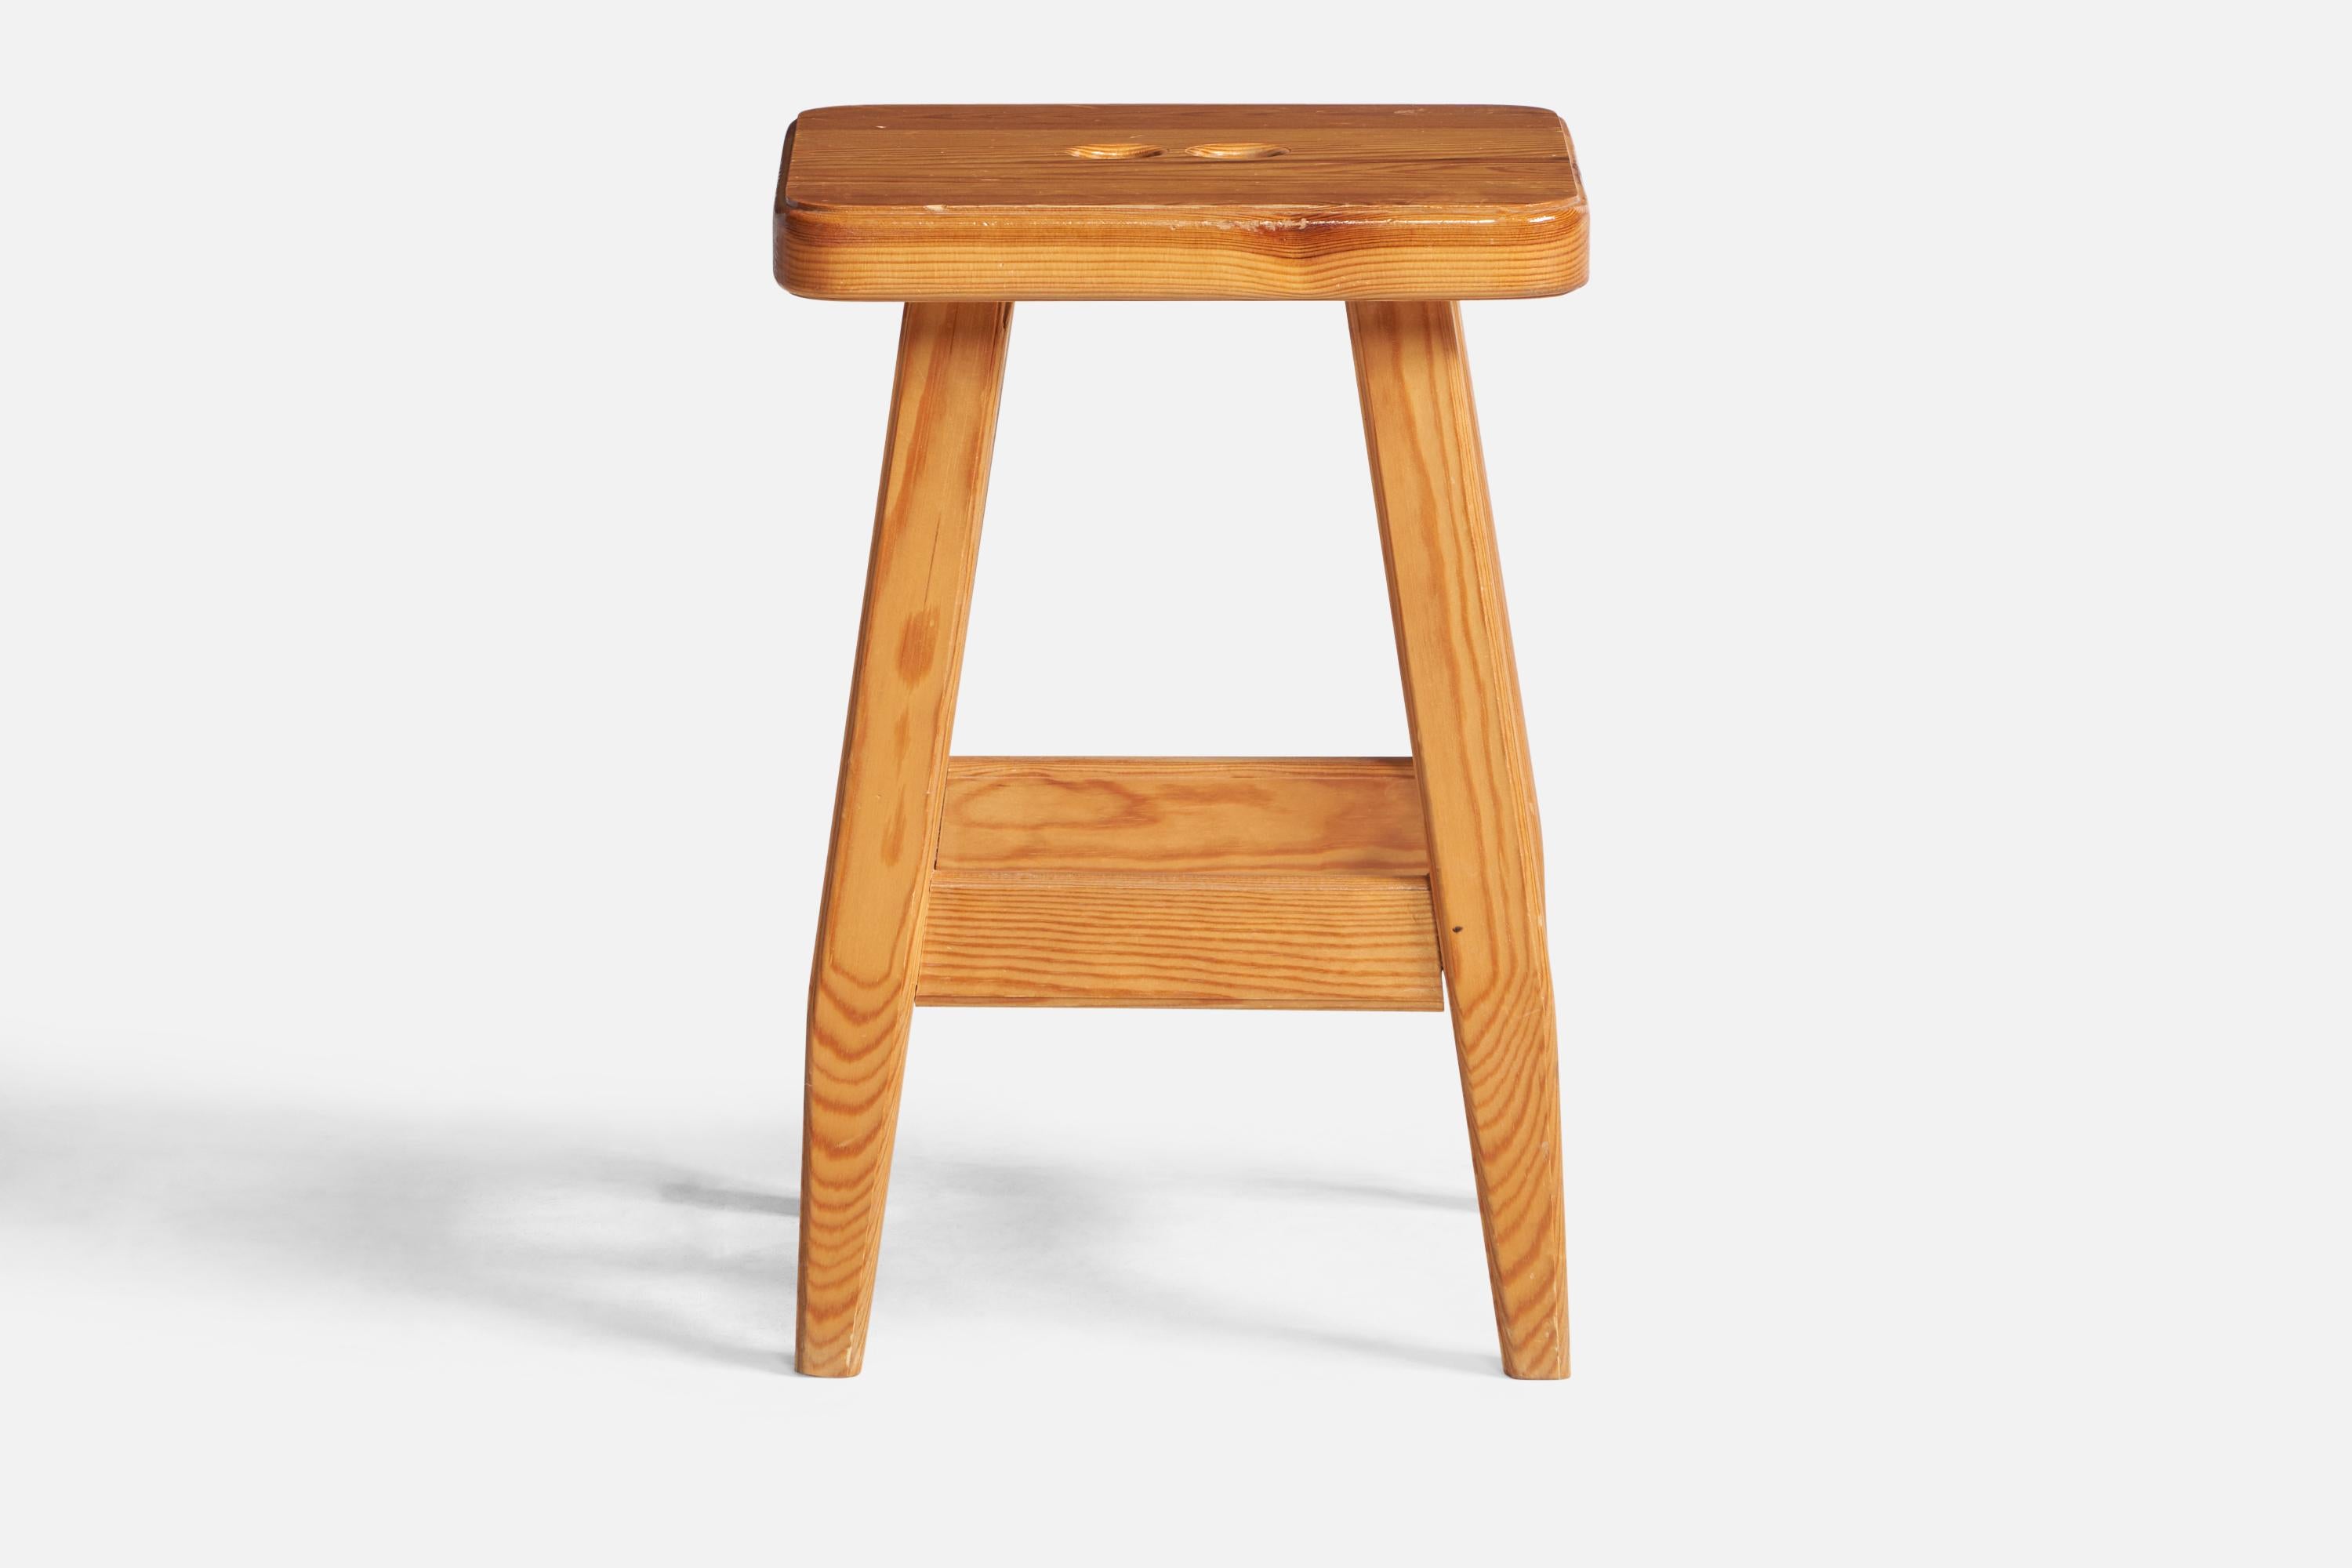 A pine stool designed and produced in Sweden, 1970s.

Seat height: 16.8”